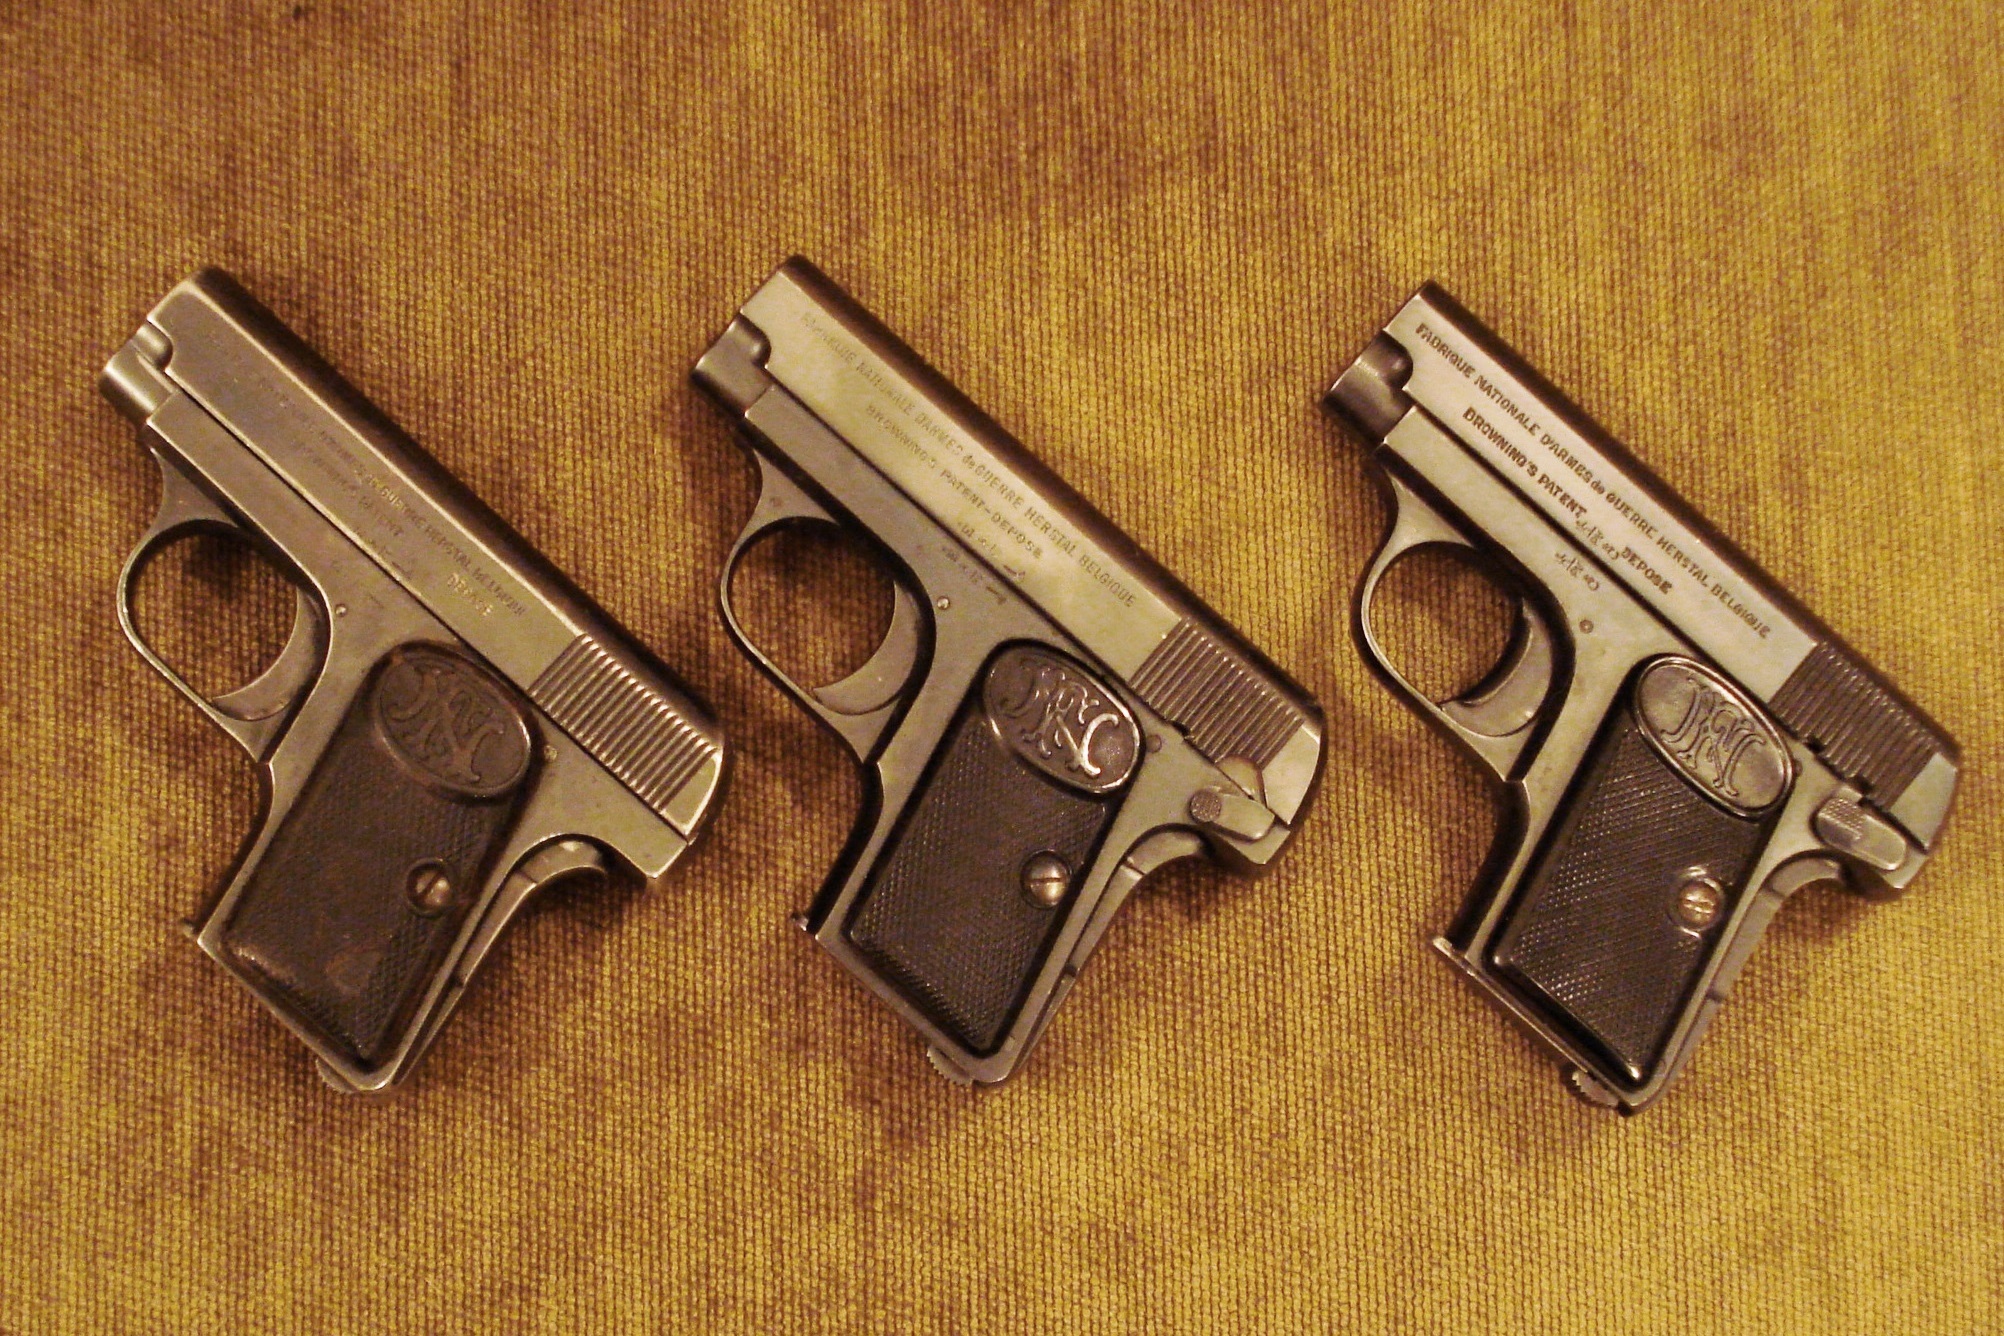 9mm pistols for target shooting